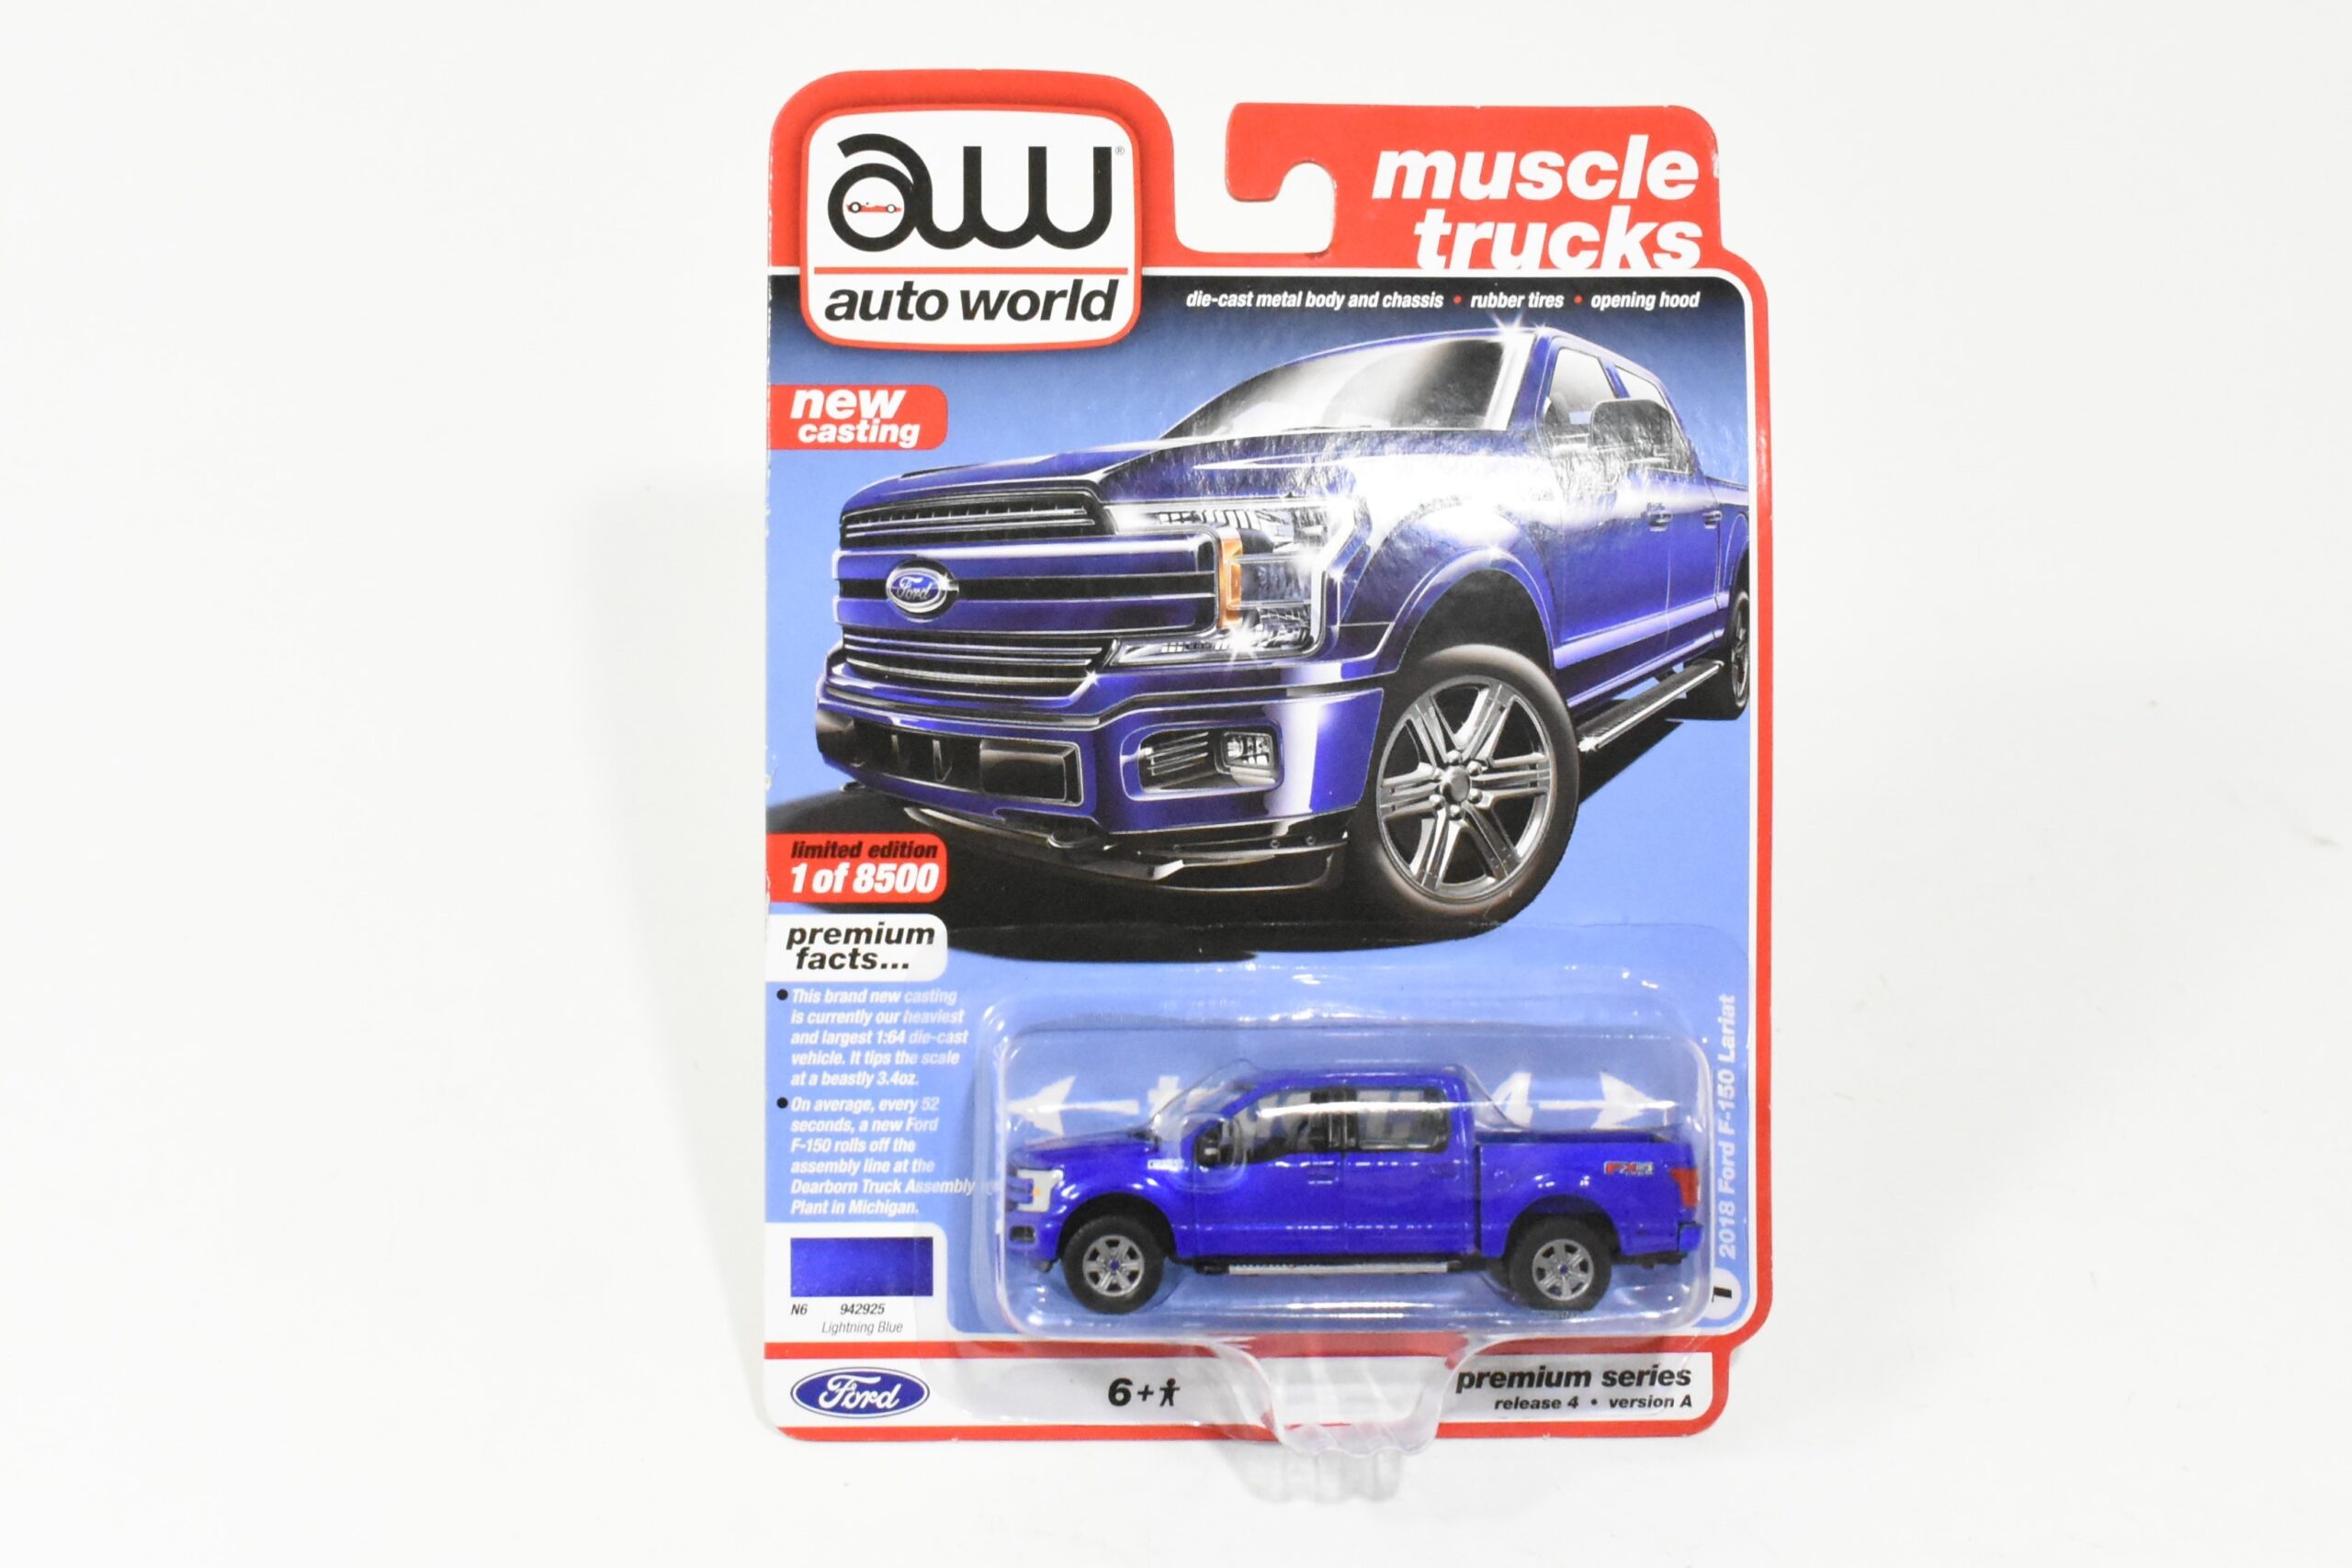 Auto World Muscle Trucks 2018 Ford F-150 Lariat Lightning Blue 1 of 8500 for sale online 